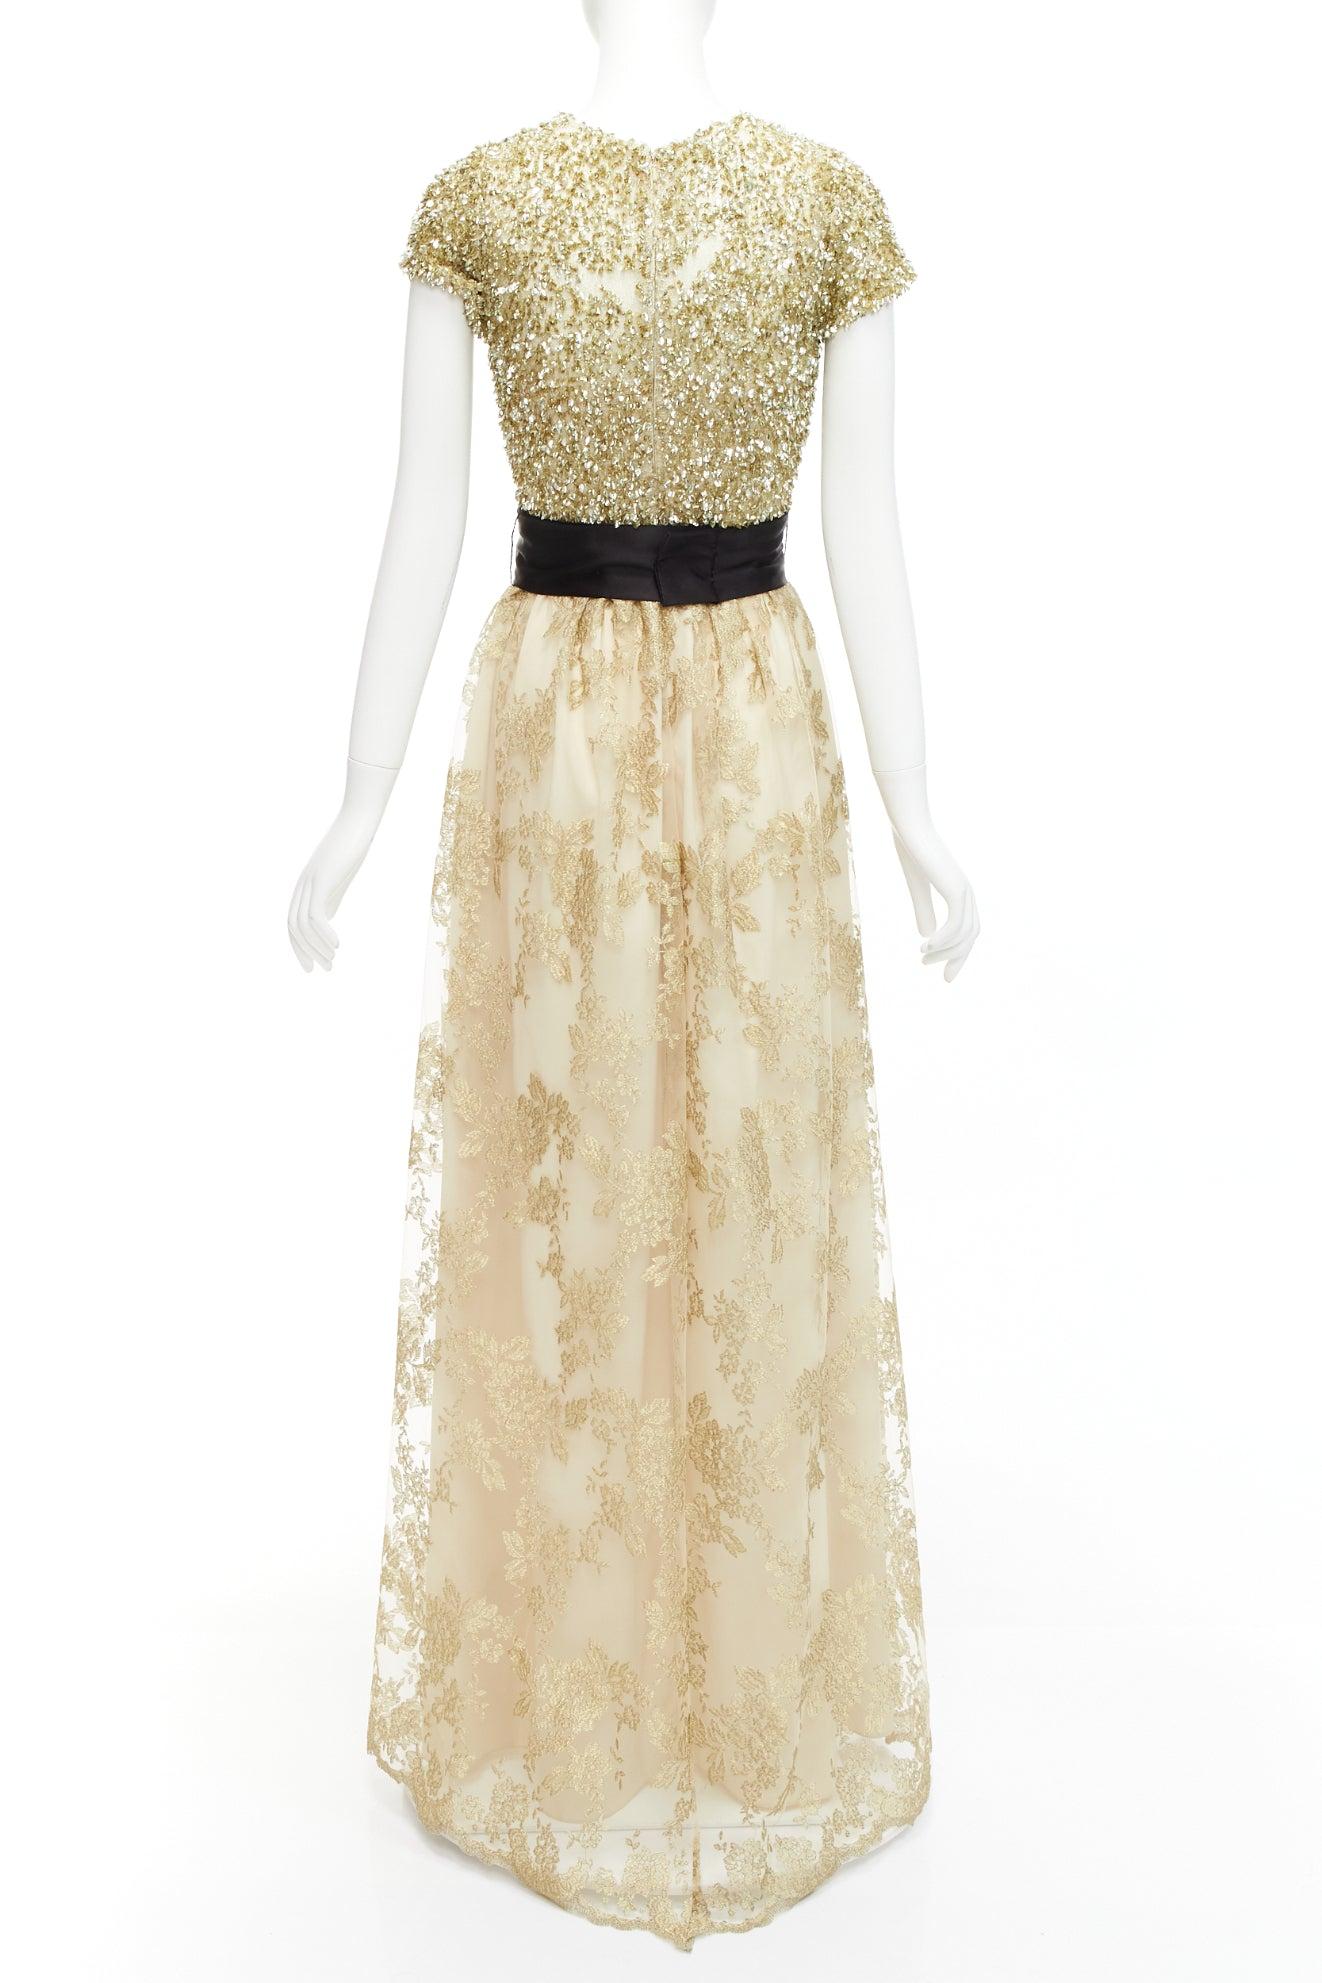 BADGLEY MISCHKA gold sequins top floral lace overlay belted gown dress US6 M For Sale 1